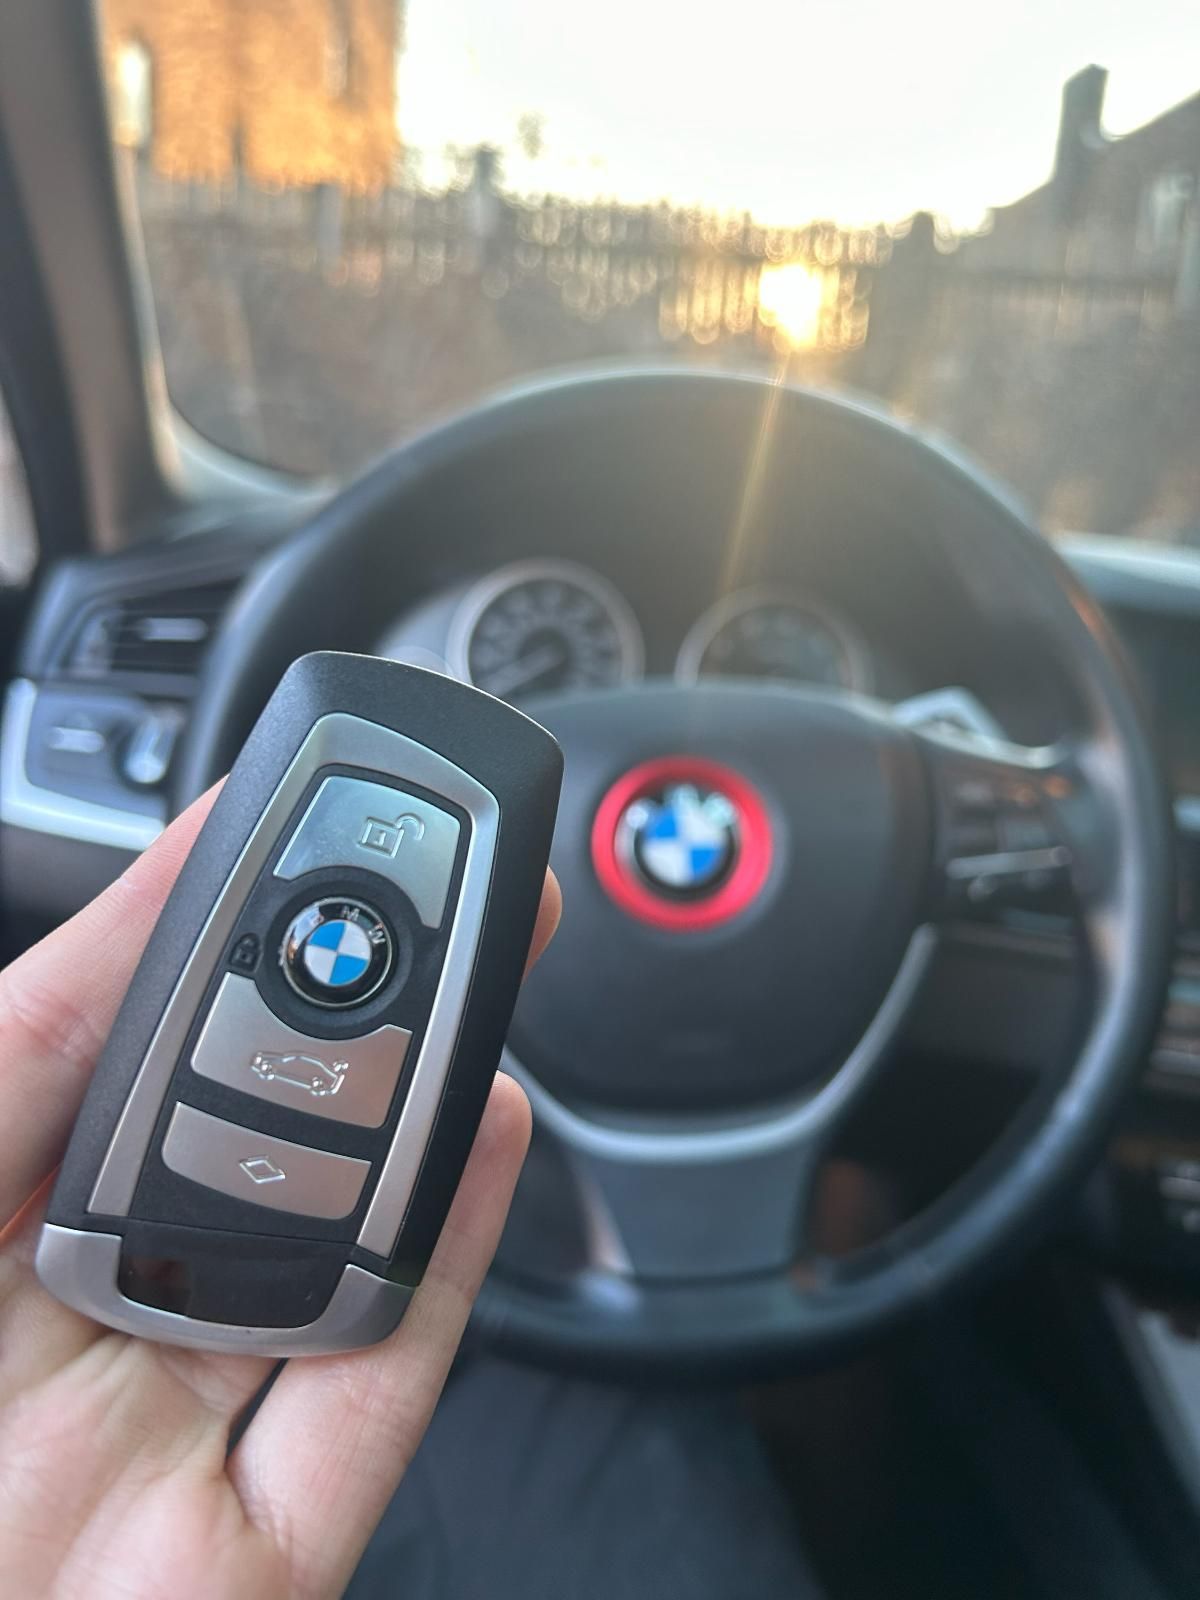 A person is holding a bmw key in front of a car steering wheel.